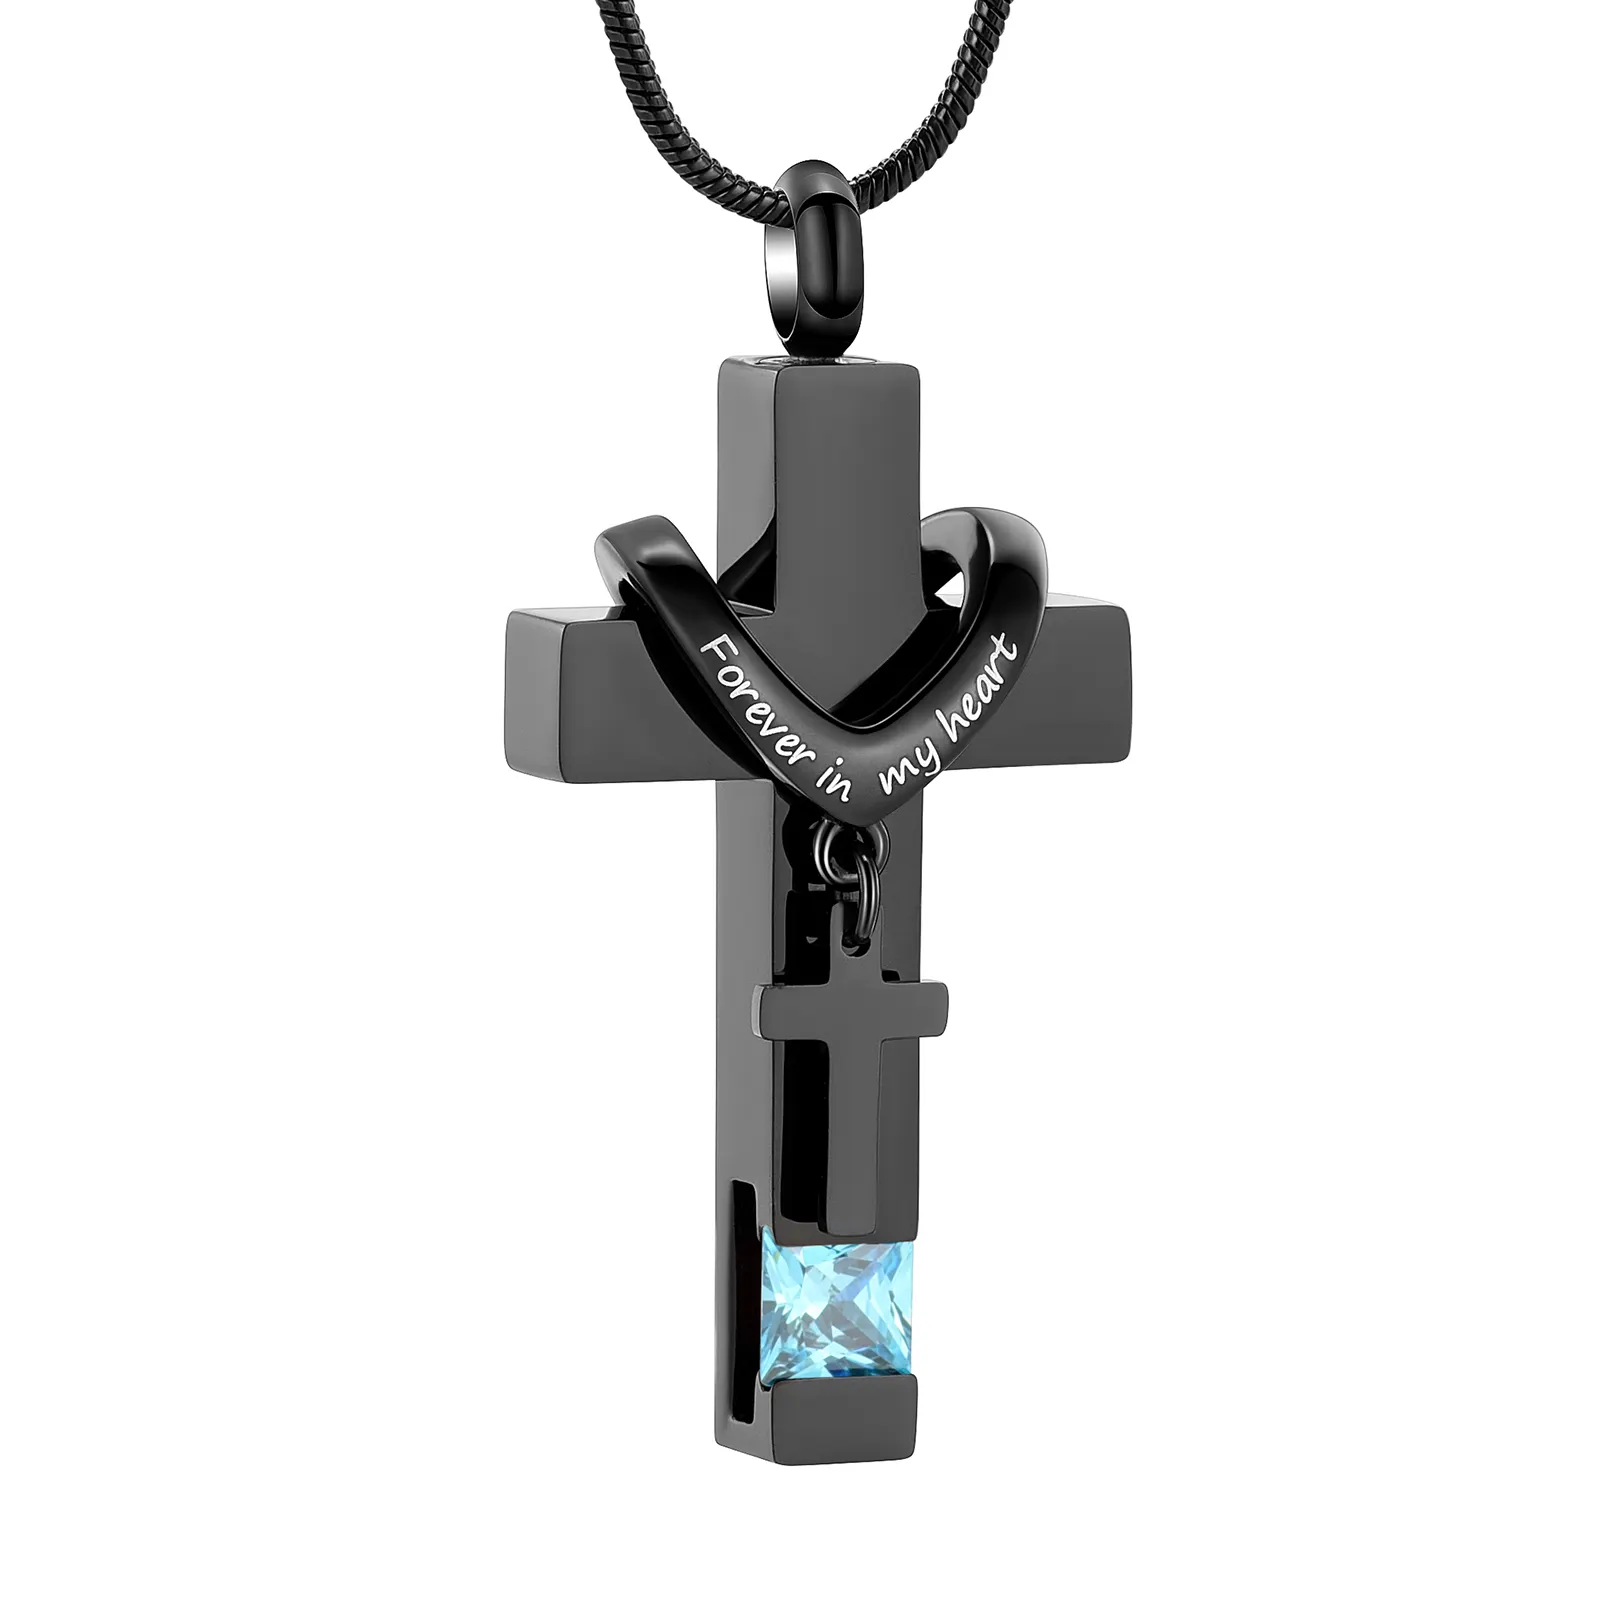 stainless steel pendant memorial jewelry Crystal cross pendant memorial locket large pendant black cross necklace